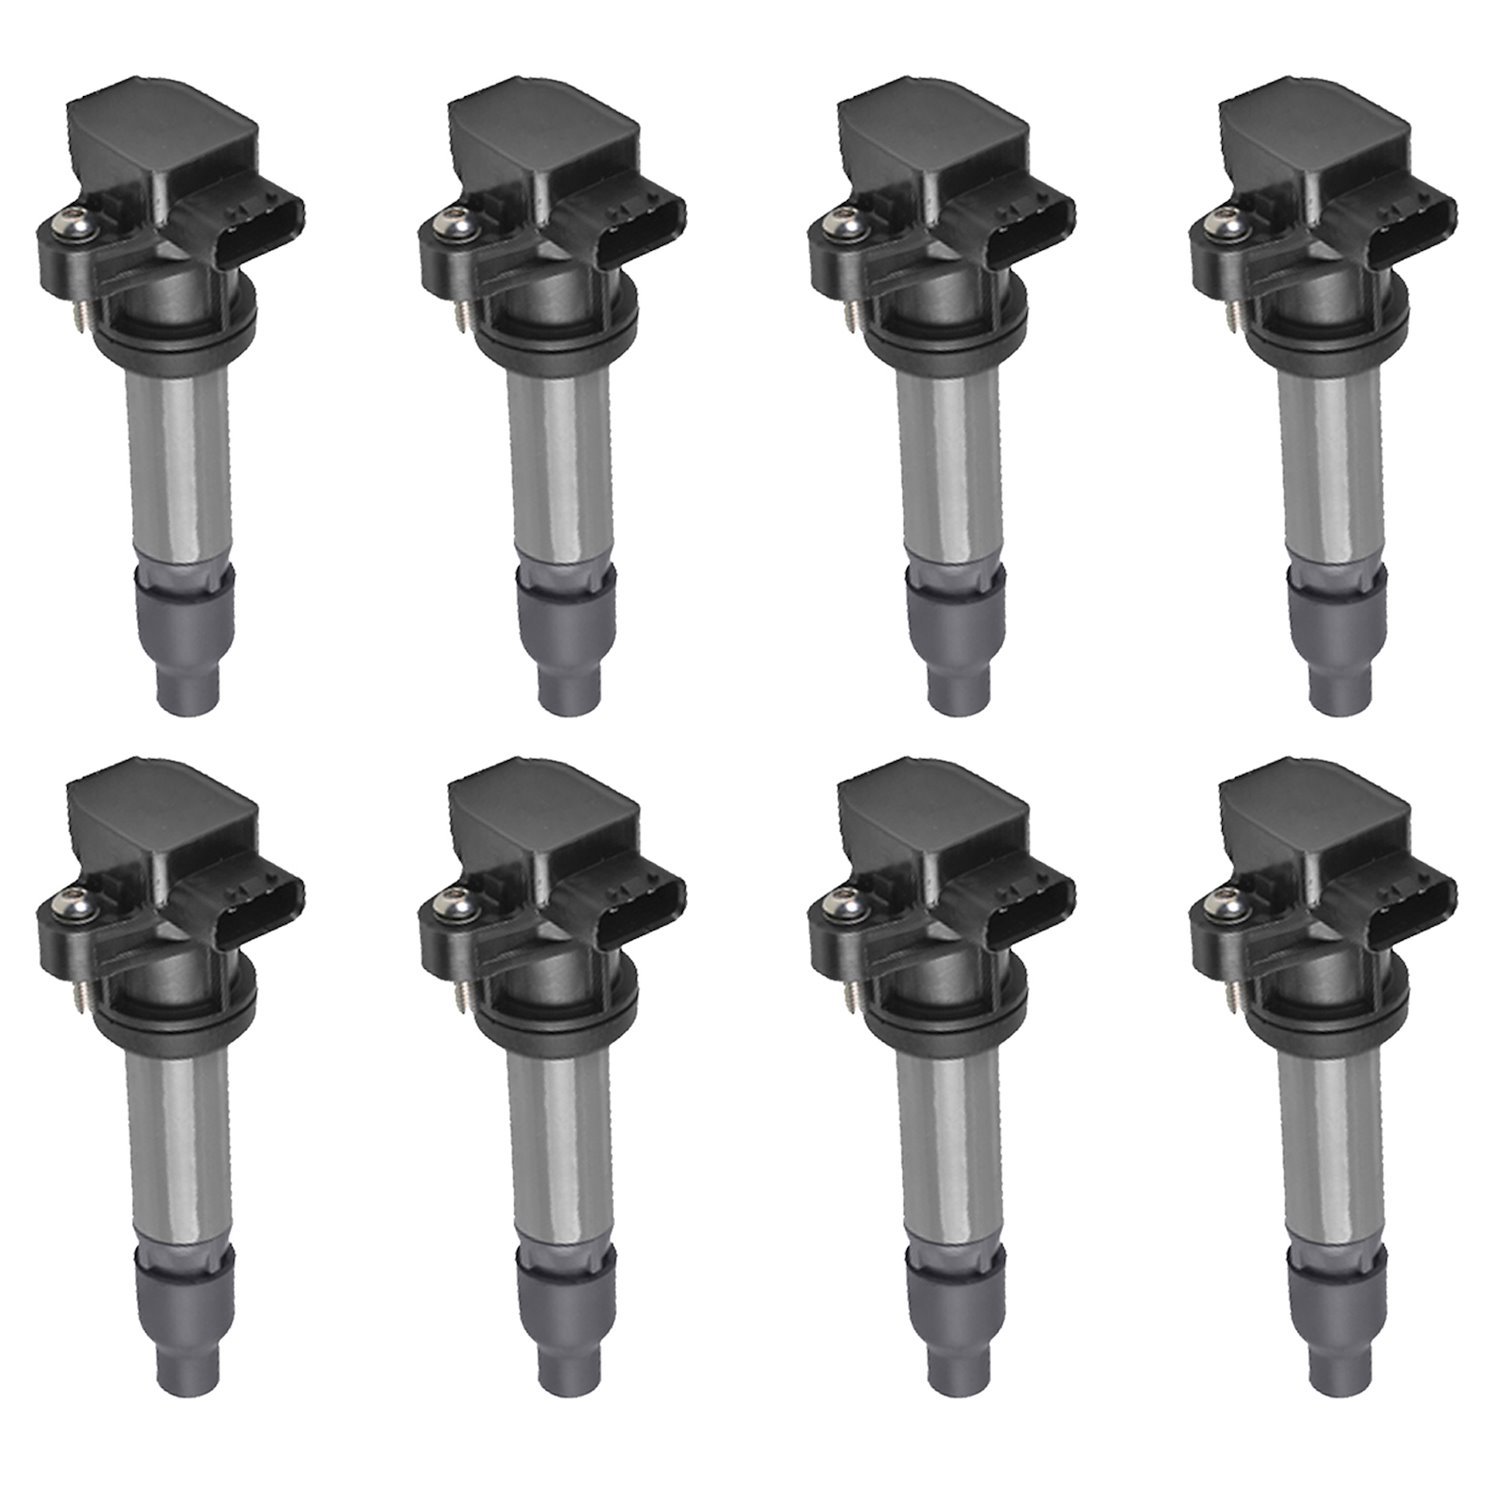 OE Replacement Ignition Coils for Buick Lucerne Cadillac SRX DTS STS XLR DeVille